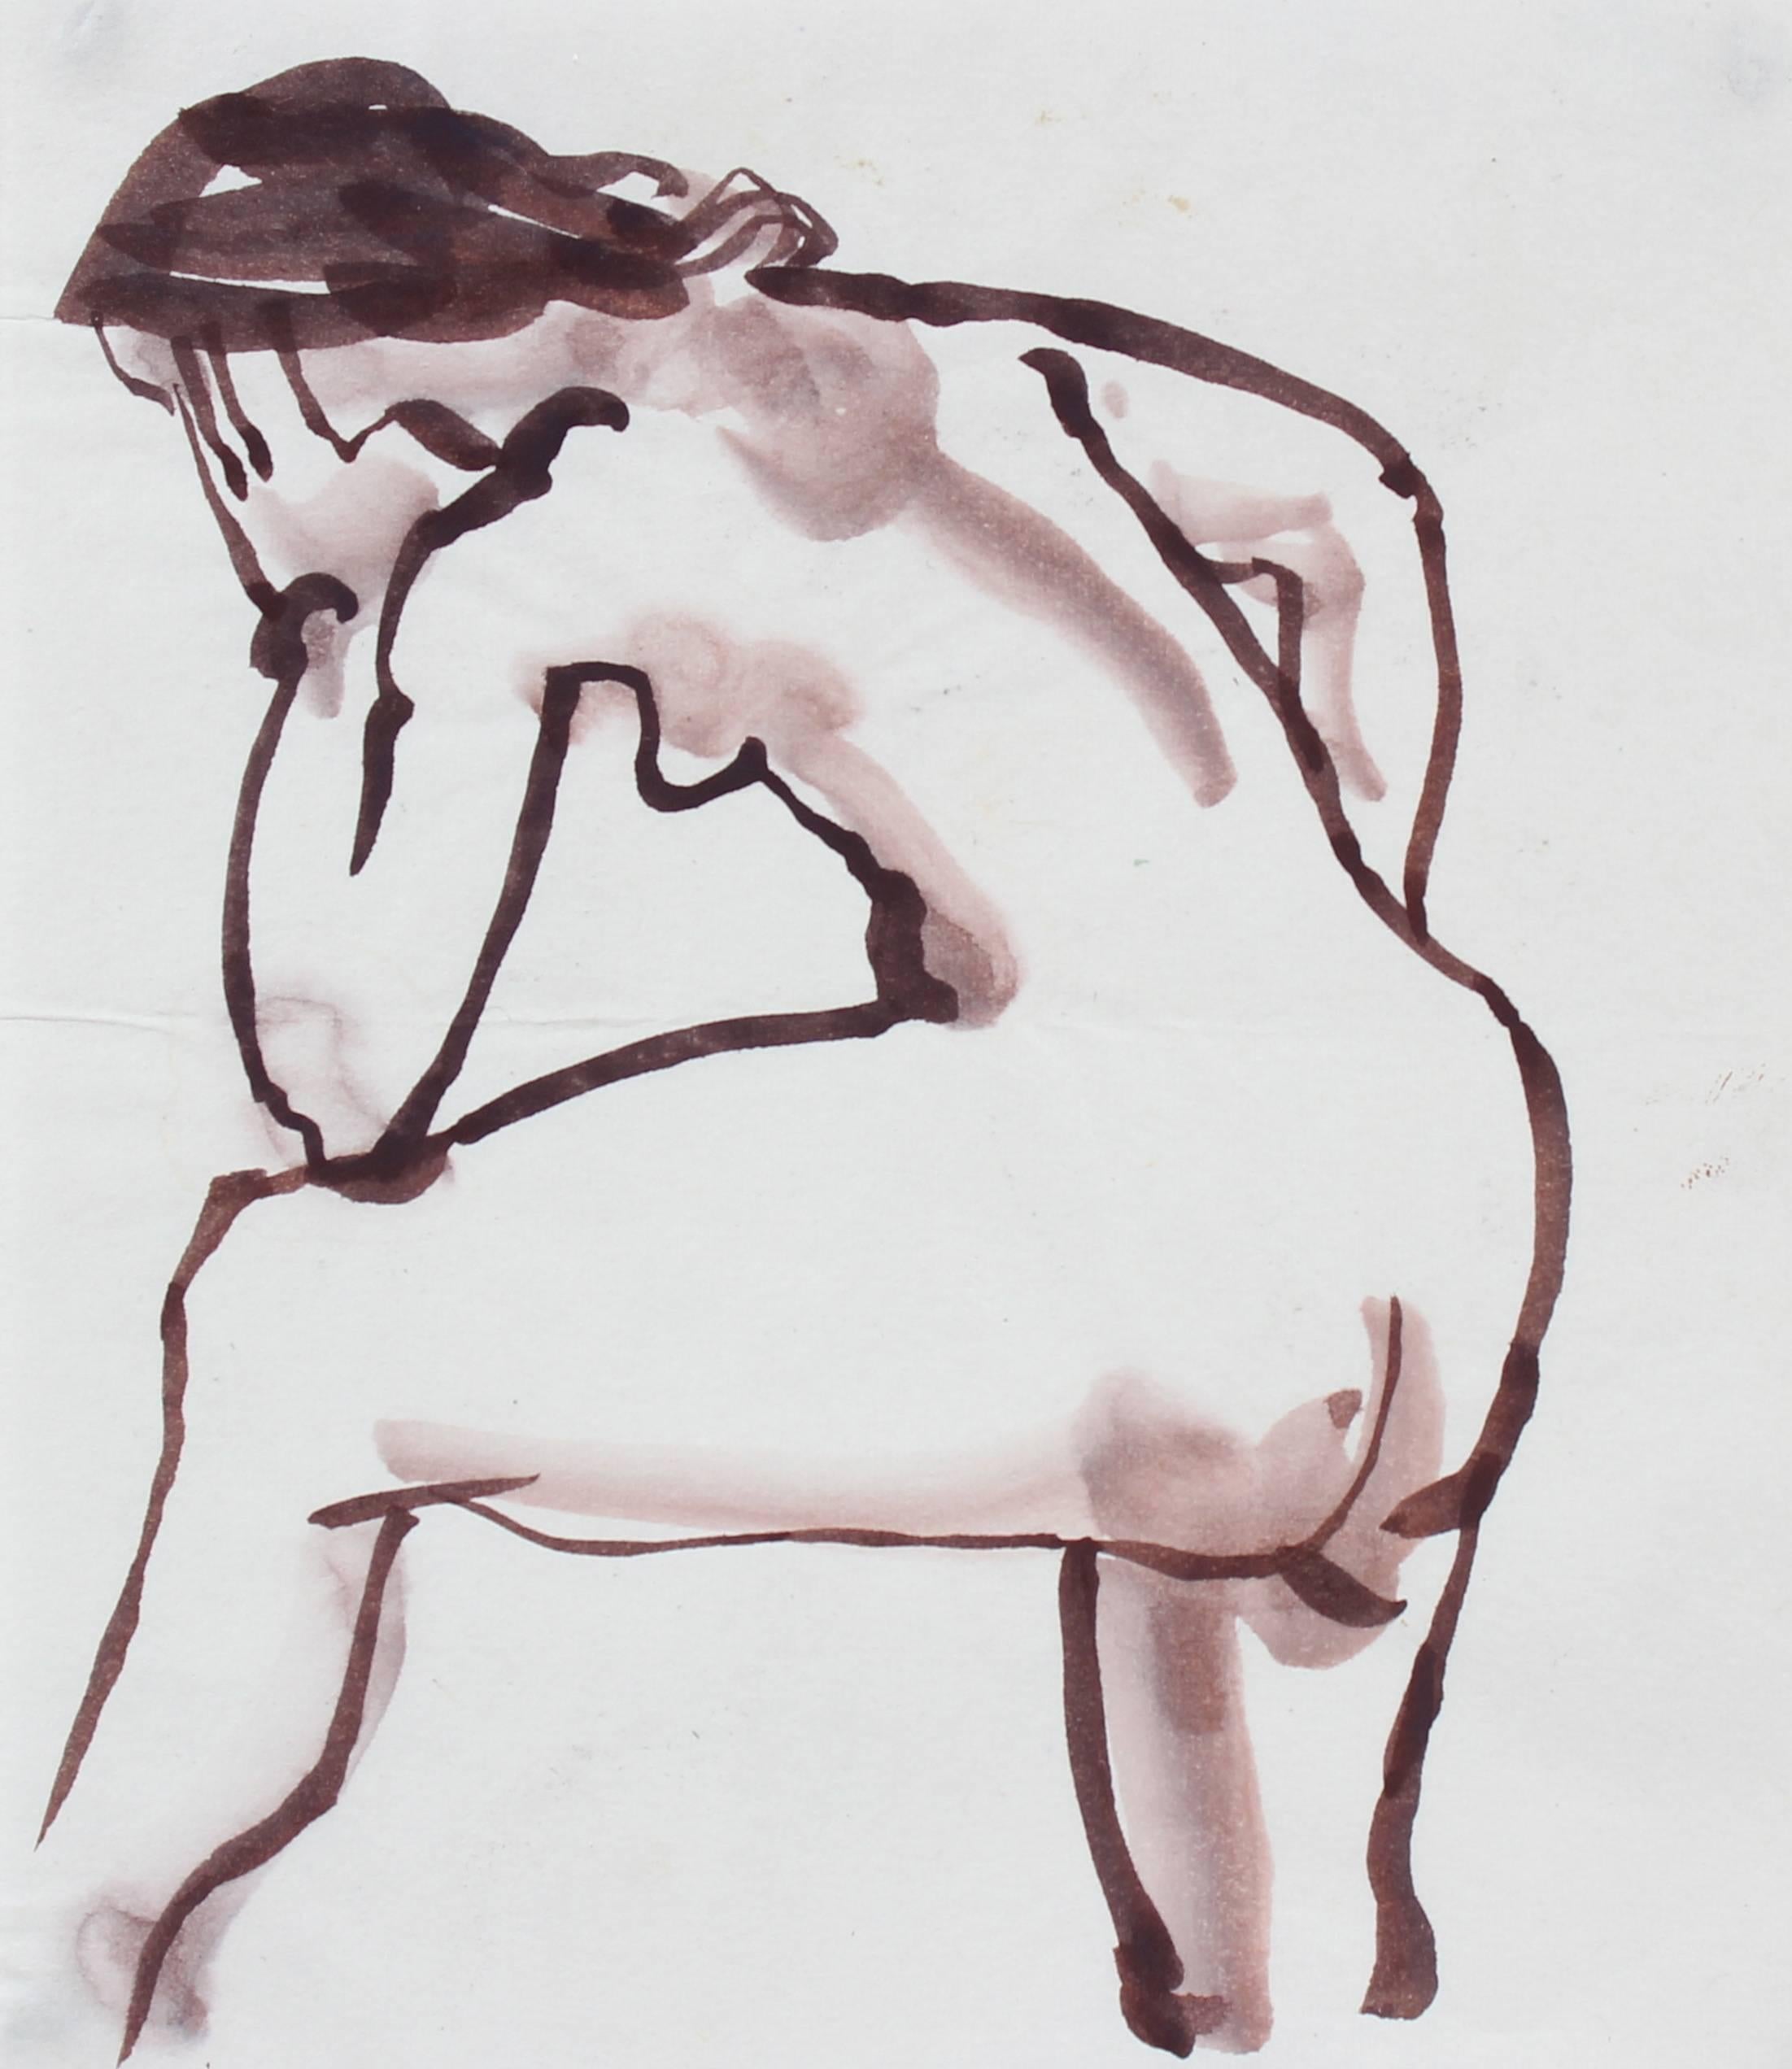 Rip Matteson Nude - Modernist Figure in Ink Wash, 20th Century